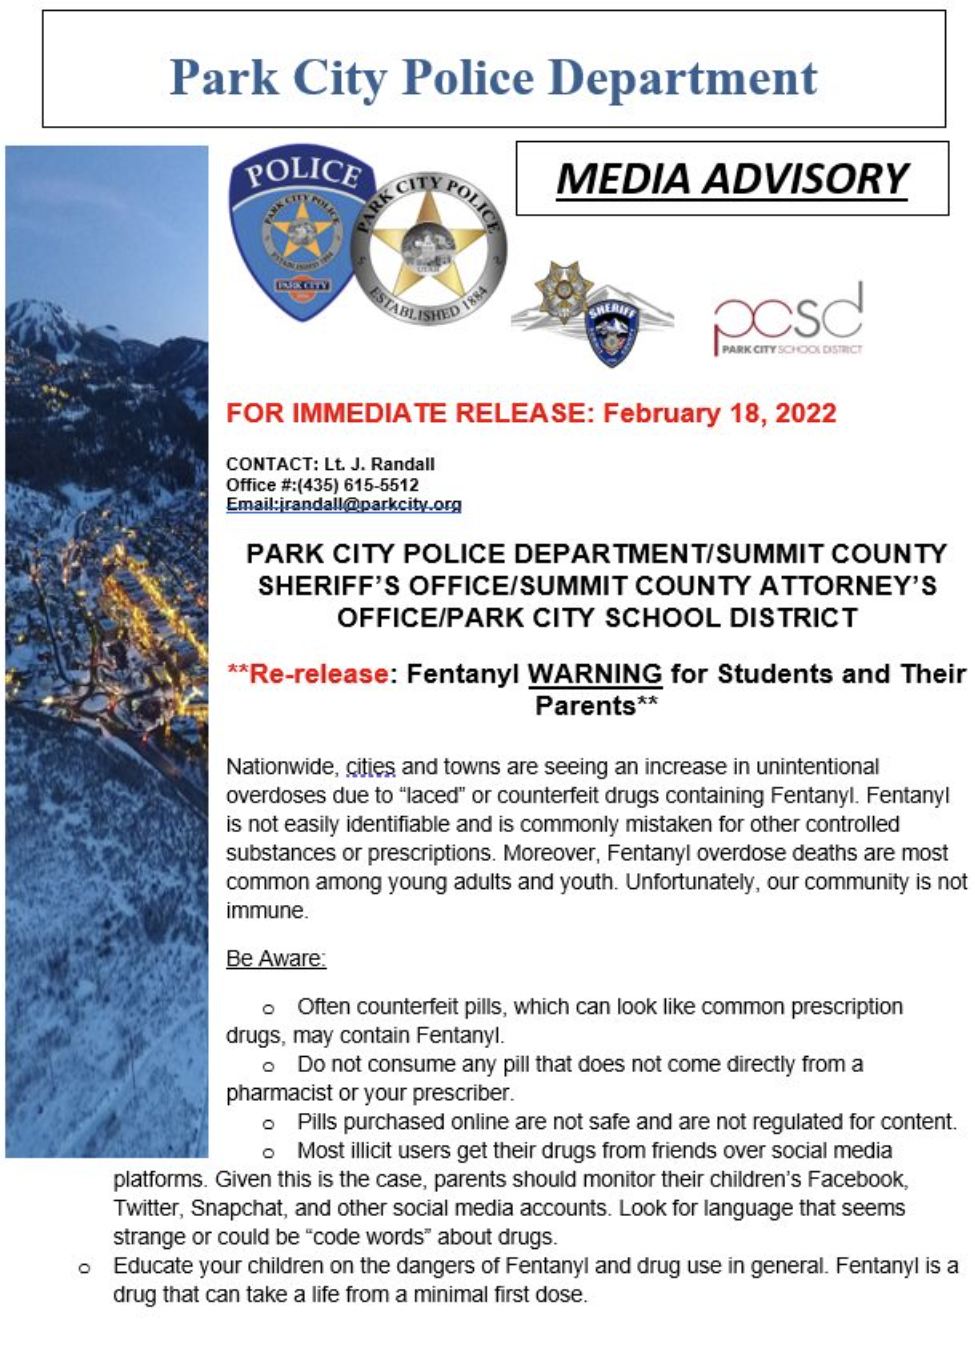 image of warning about fentanyl pills from Park City Utah police